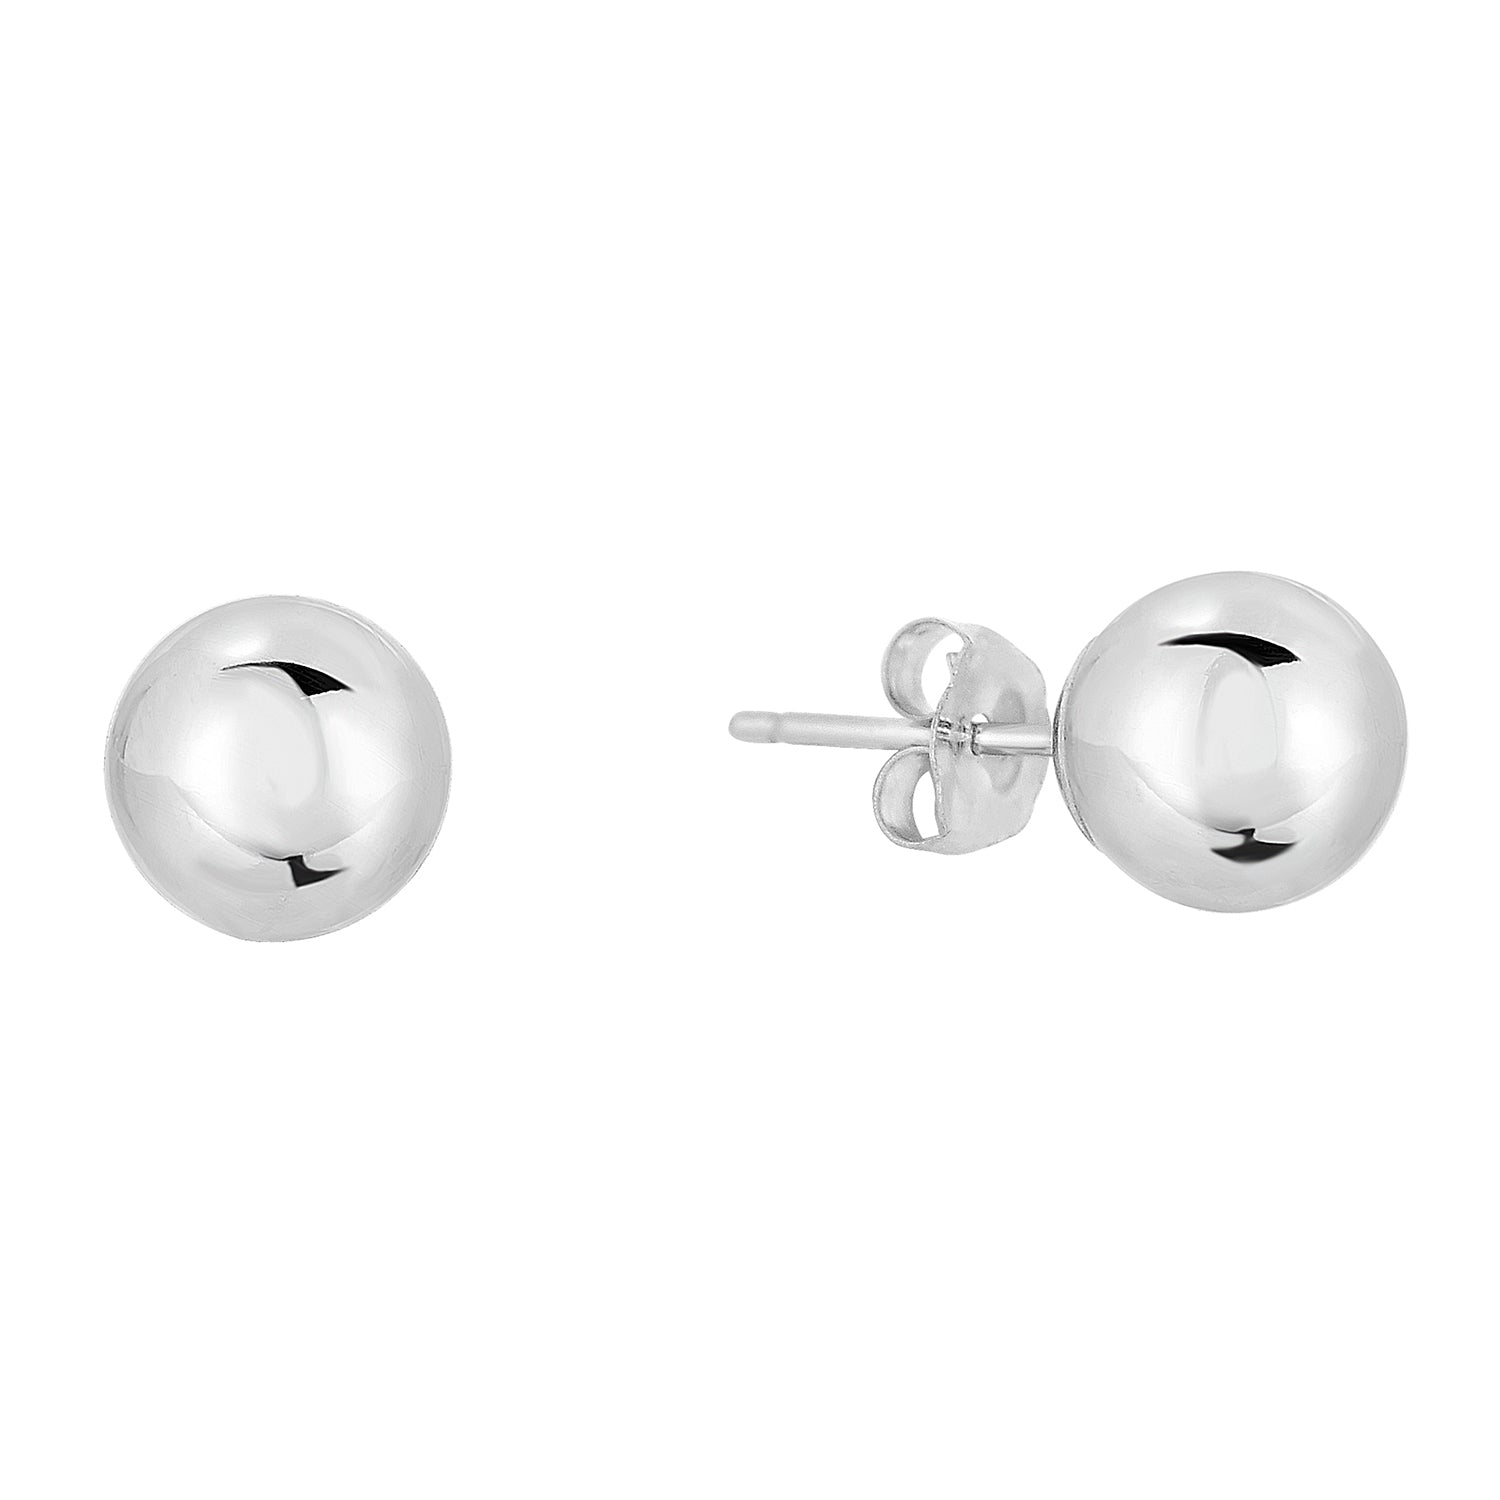 14k White Gold Screw-Back Type Replacement Earring Backs for 0.7mm Posts (1  Pair)